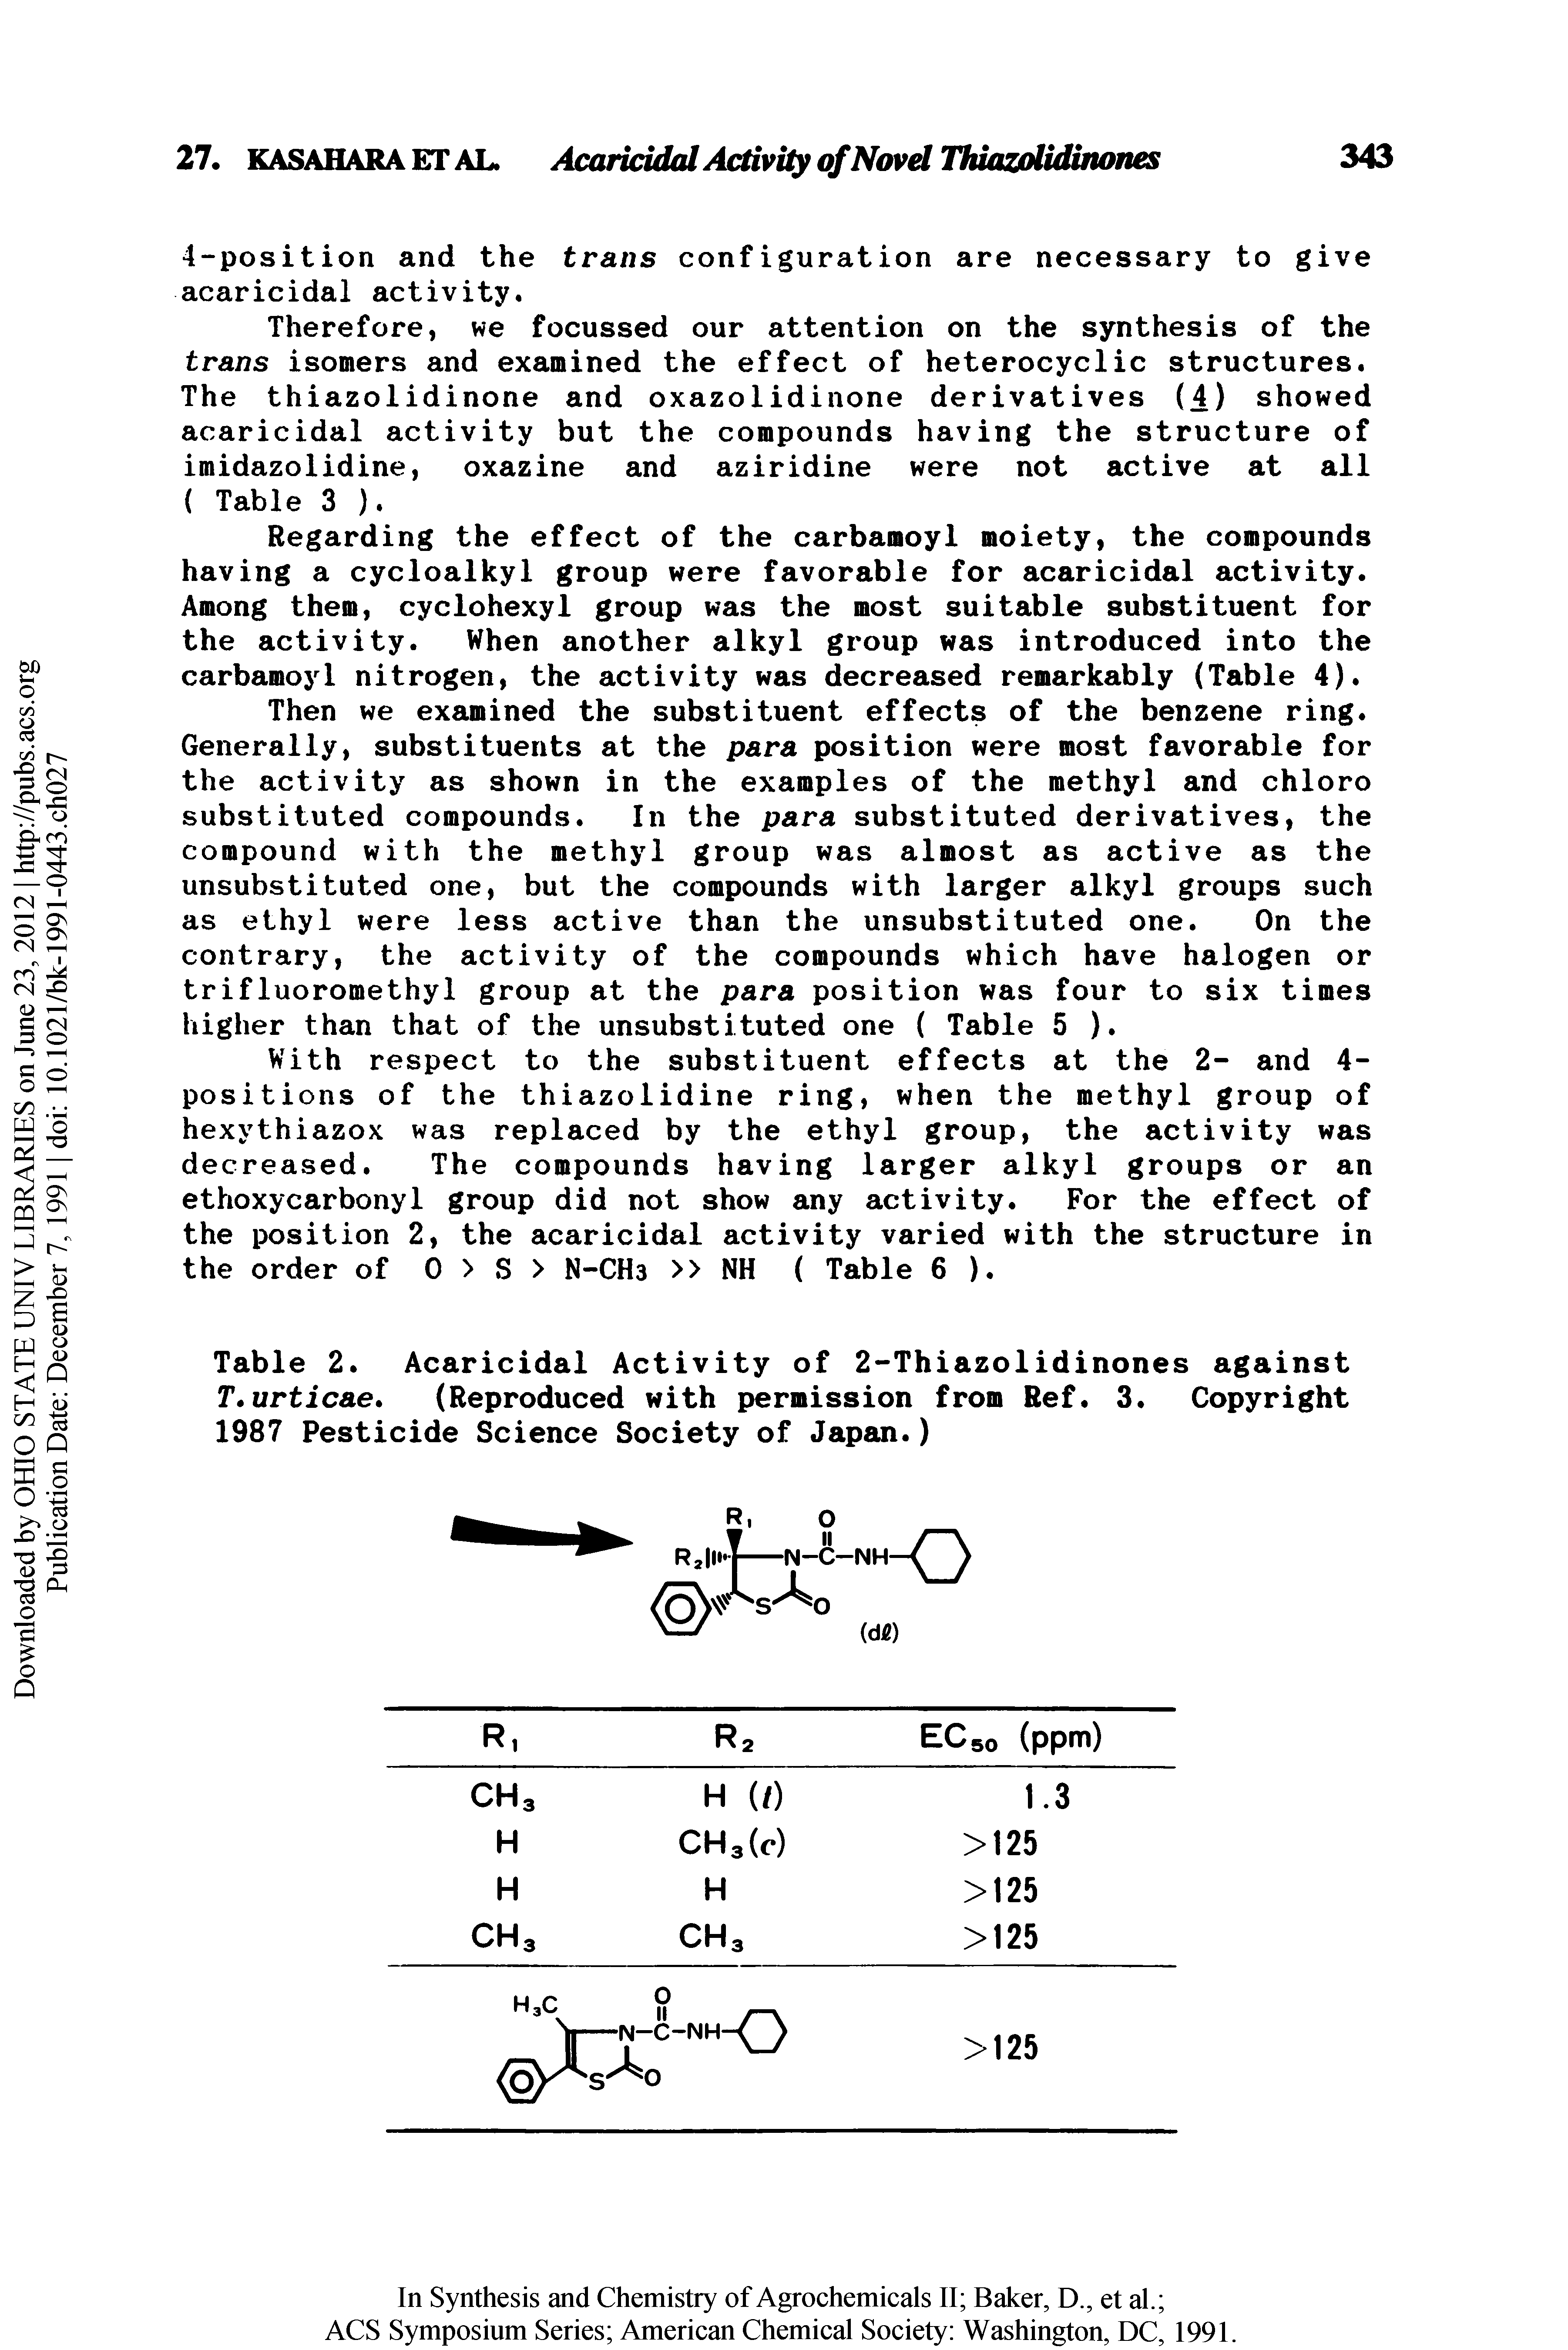 Table 2. Acaricidal Activity of 2-Thiazolidinones against T.urticae. (Reproduced with permission from Ref. 3. Copyright 1987 Pesticide Science Society of Japan.)...